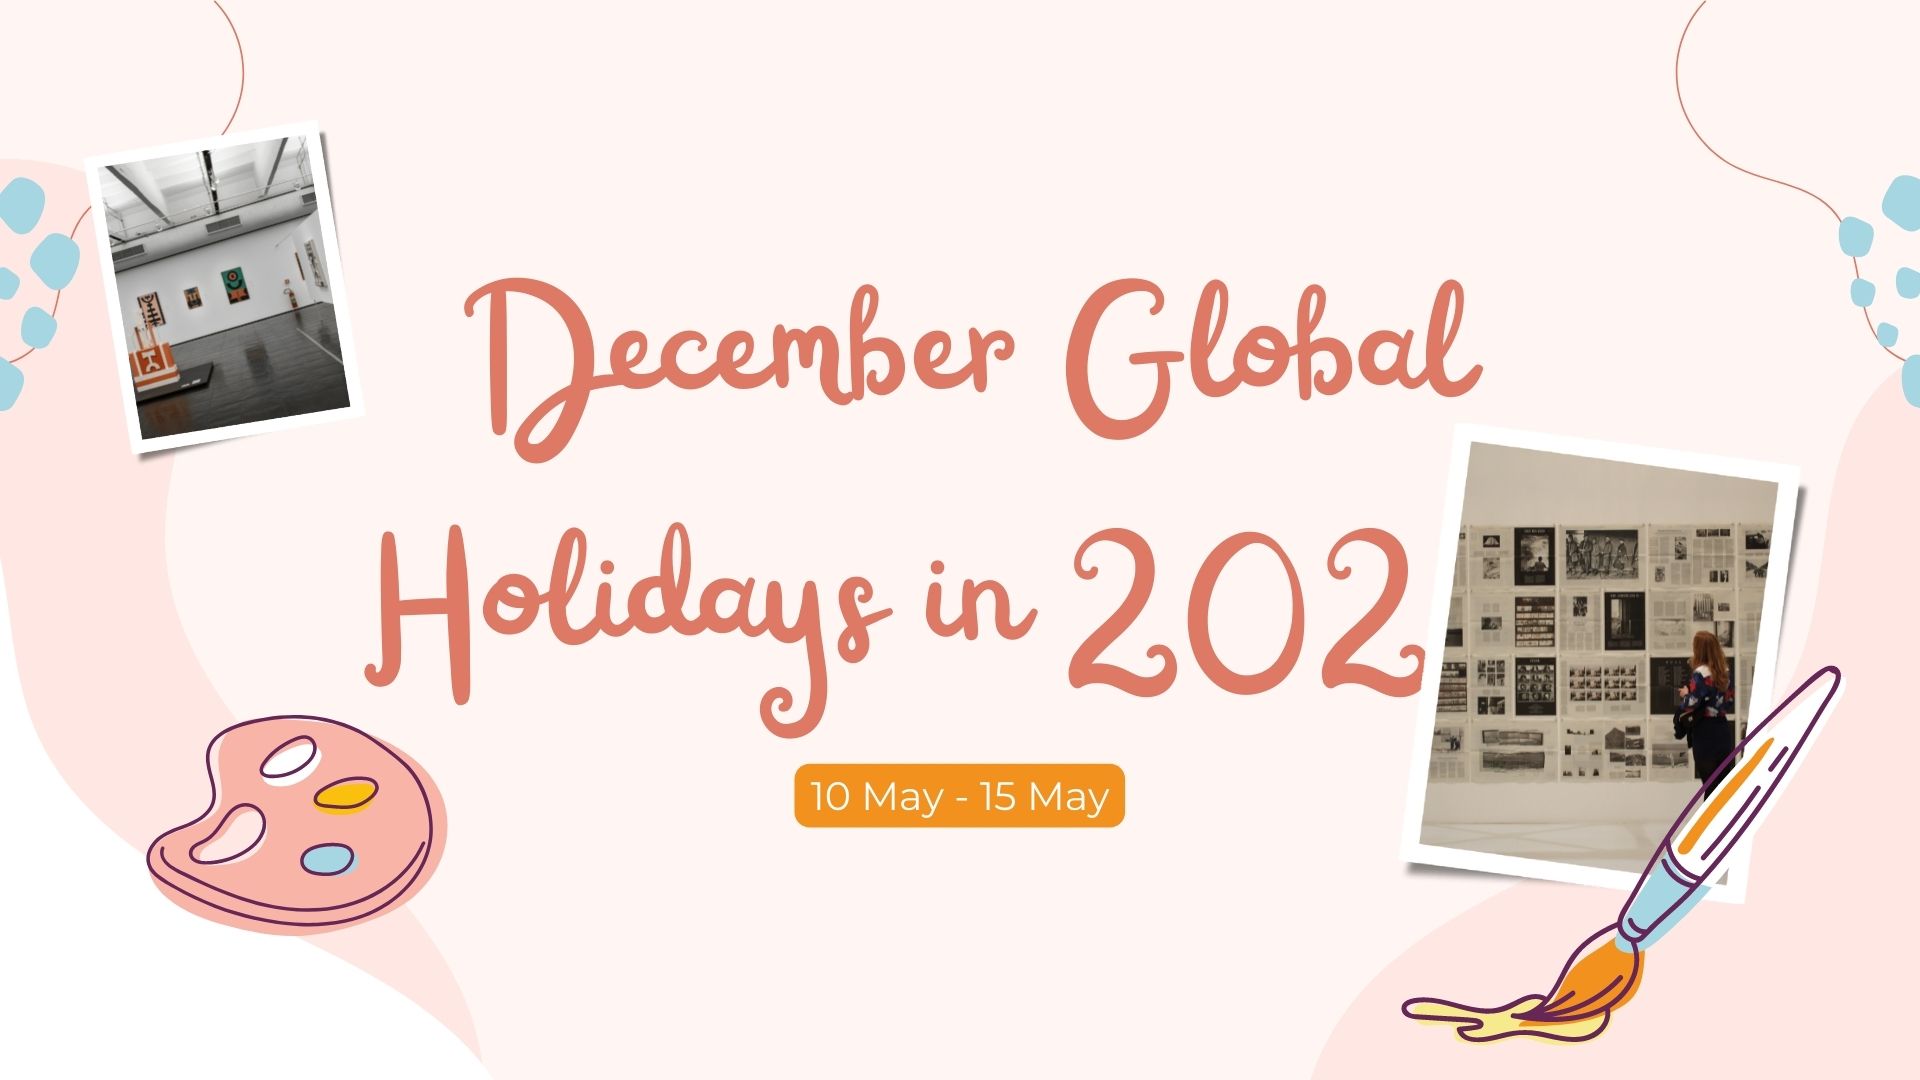 A Complete Calendar For The December Global Holidays In 2022 The Safe